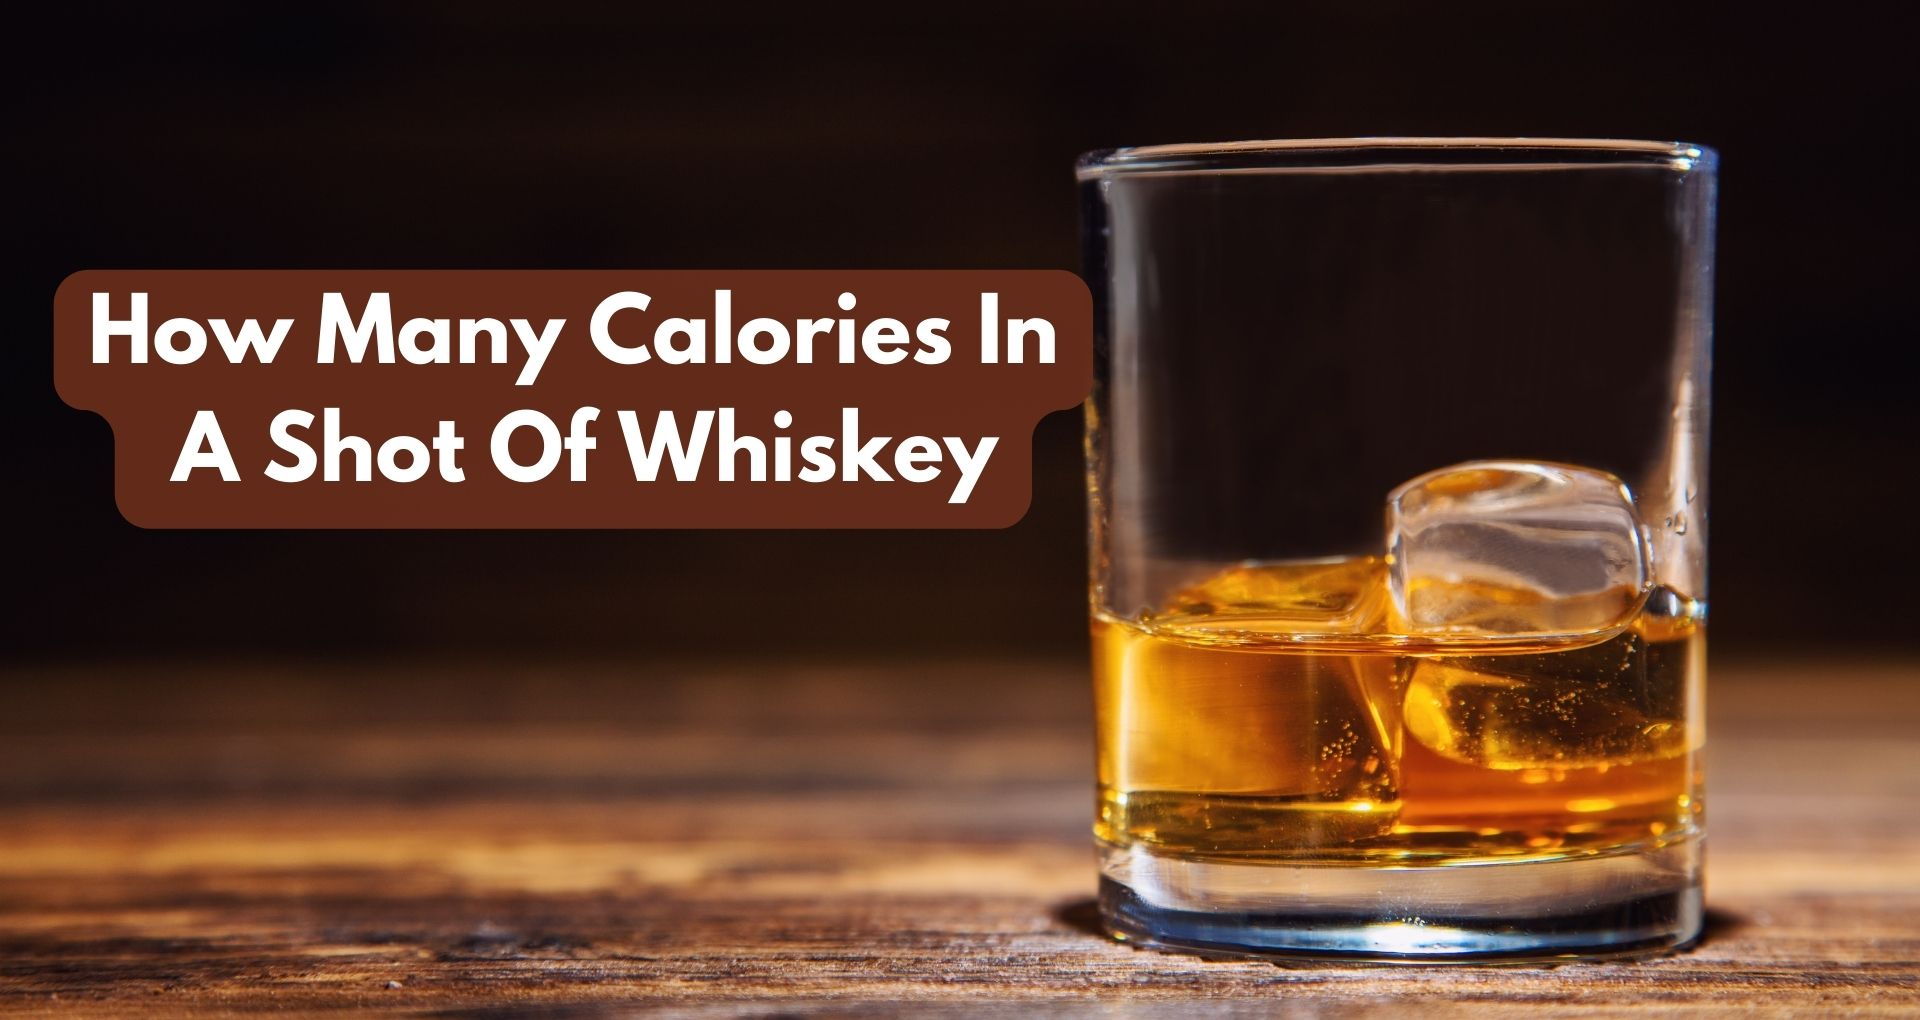 How Many Calories In A Shot Of Whiskey?